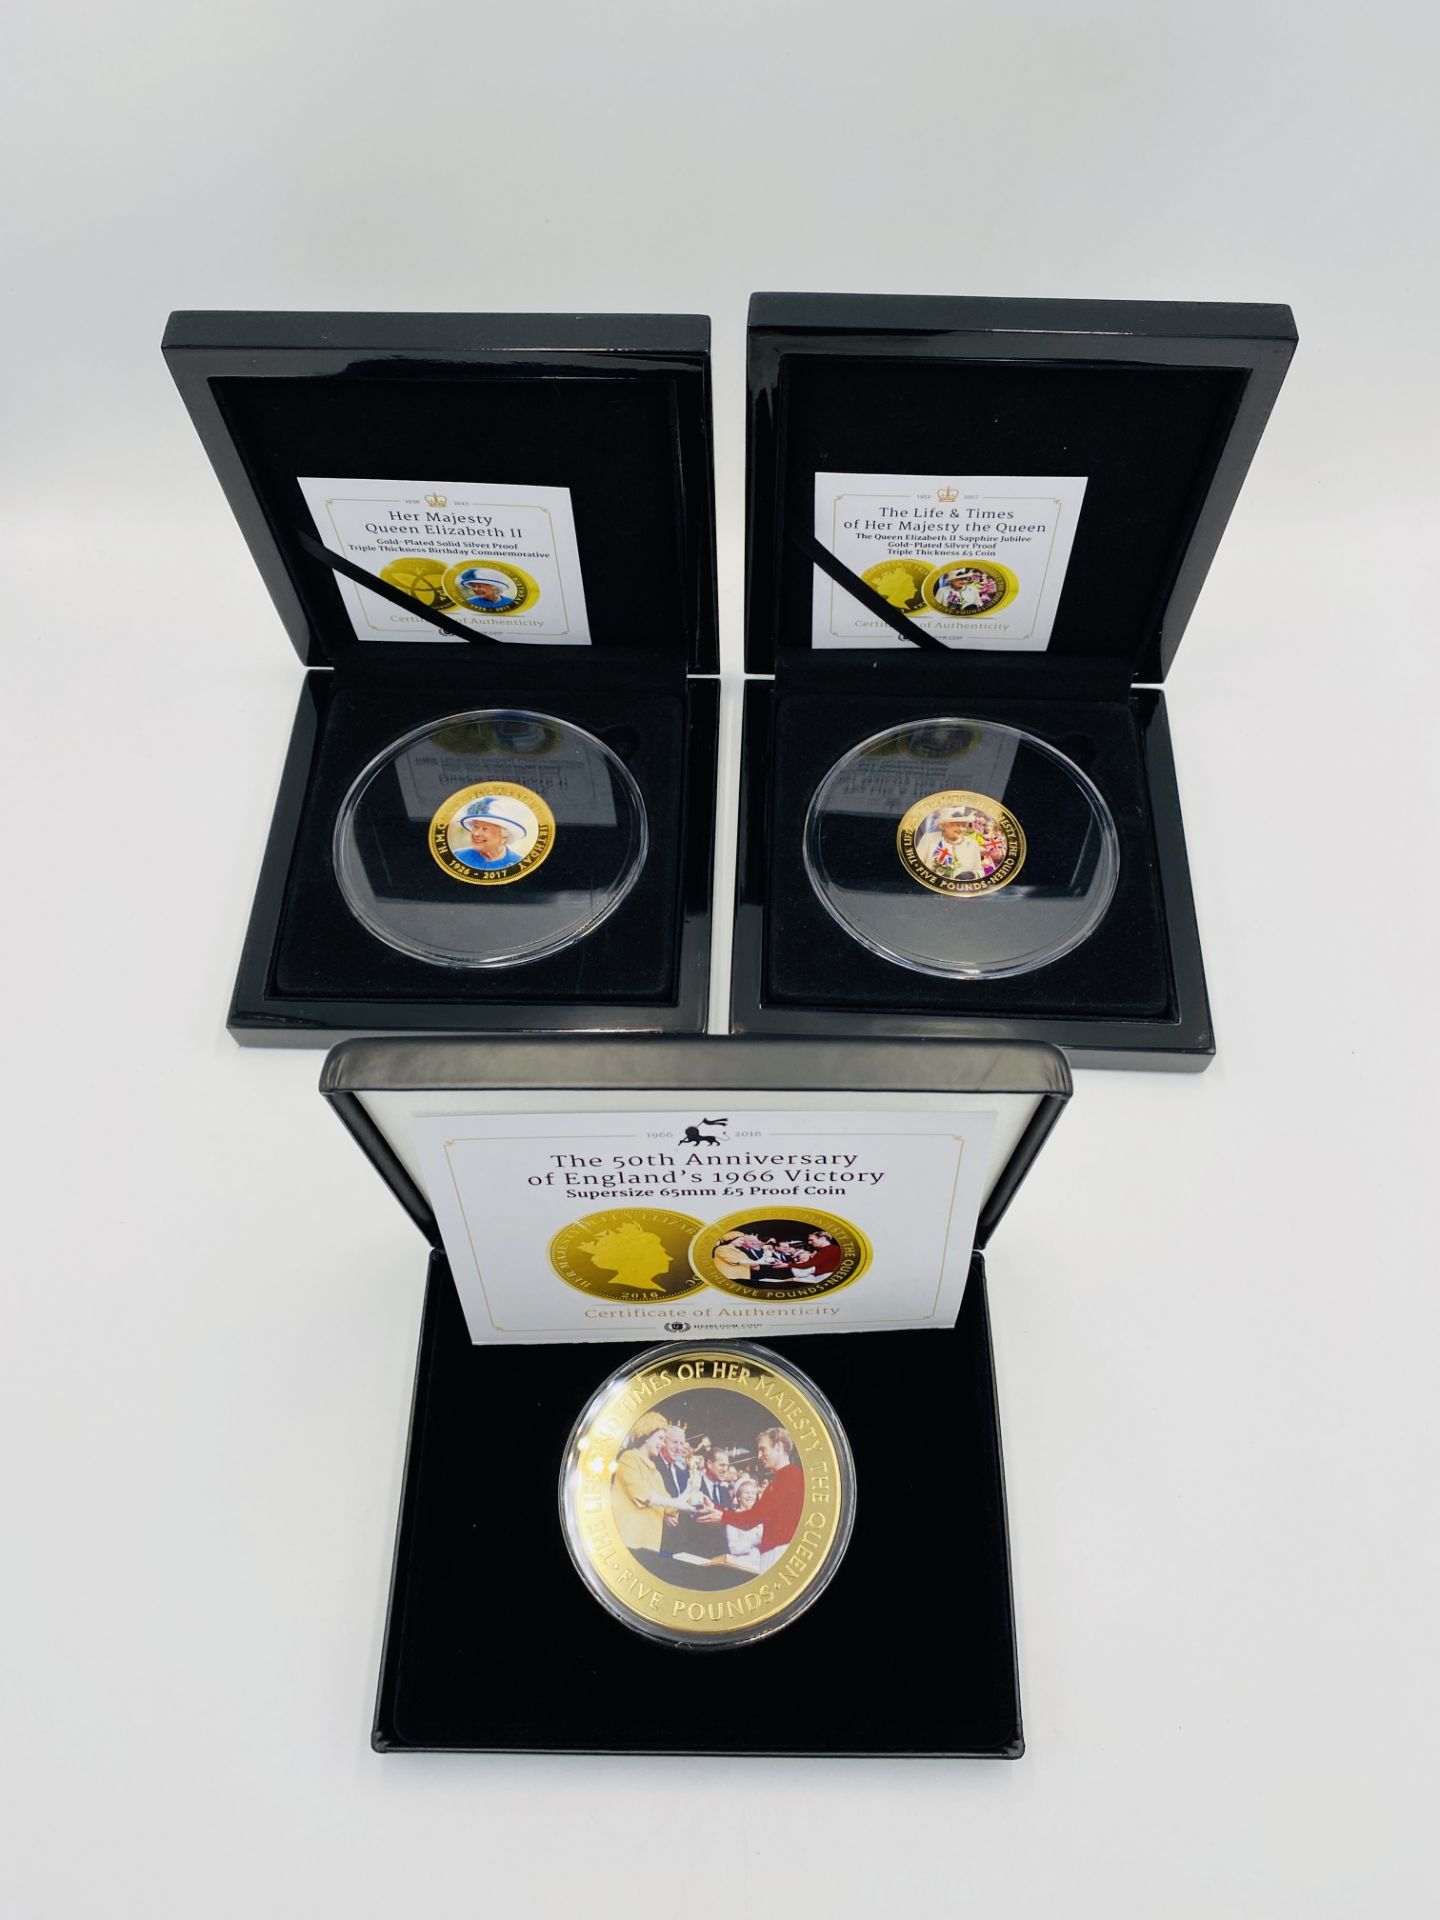 Three gold plated collectable coins